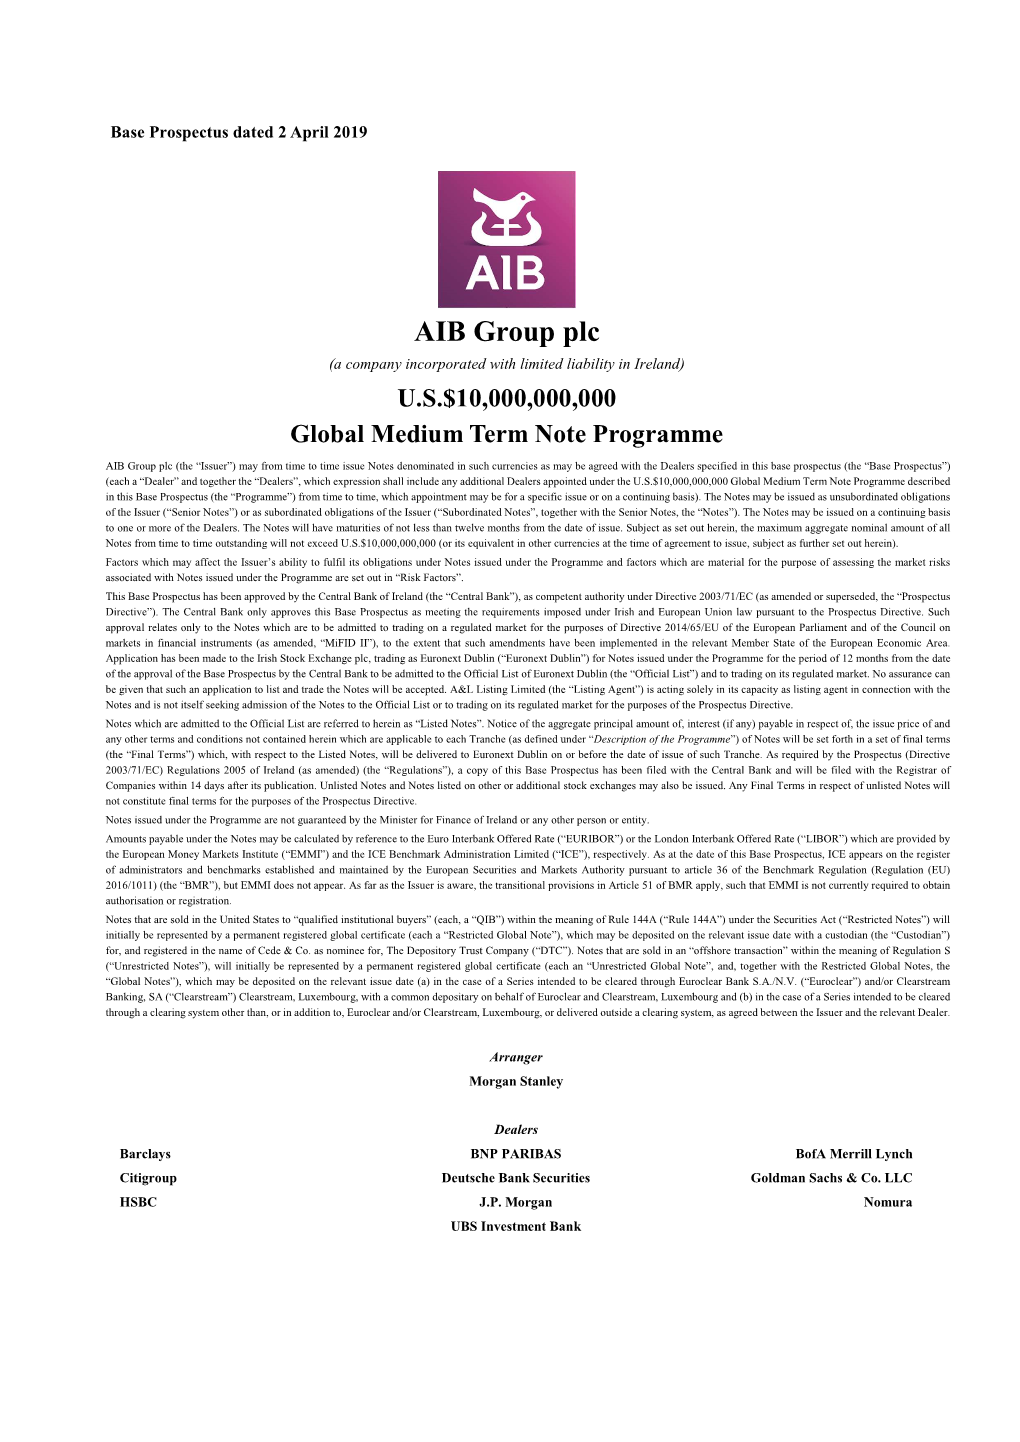 AIB Group Plc (A Company Incorporated with Limited Liability in Ireland) U.S.$10,000,000,000 Global Medium Term Note Programme